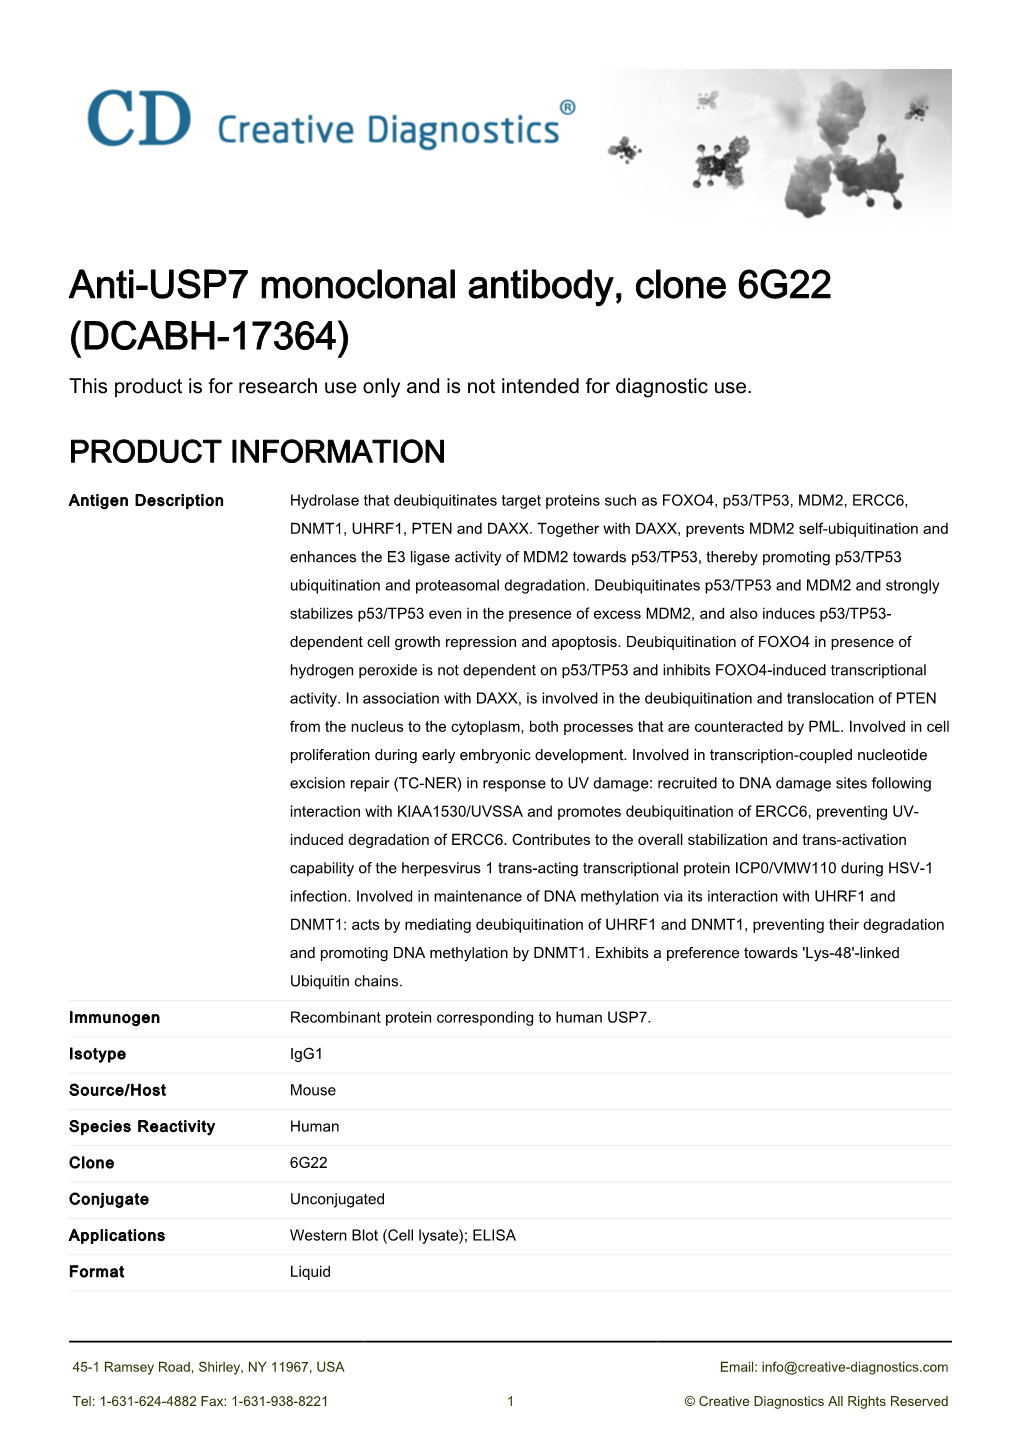 Anti-USP7 Monoclonal Antibody, Clone 6G22 (DCABH-17364) This Product Is for Research Use Only and Is Not Intended for Diagnostic Use